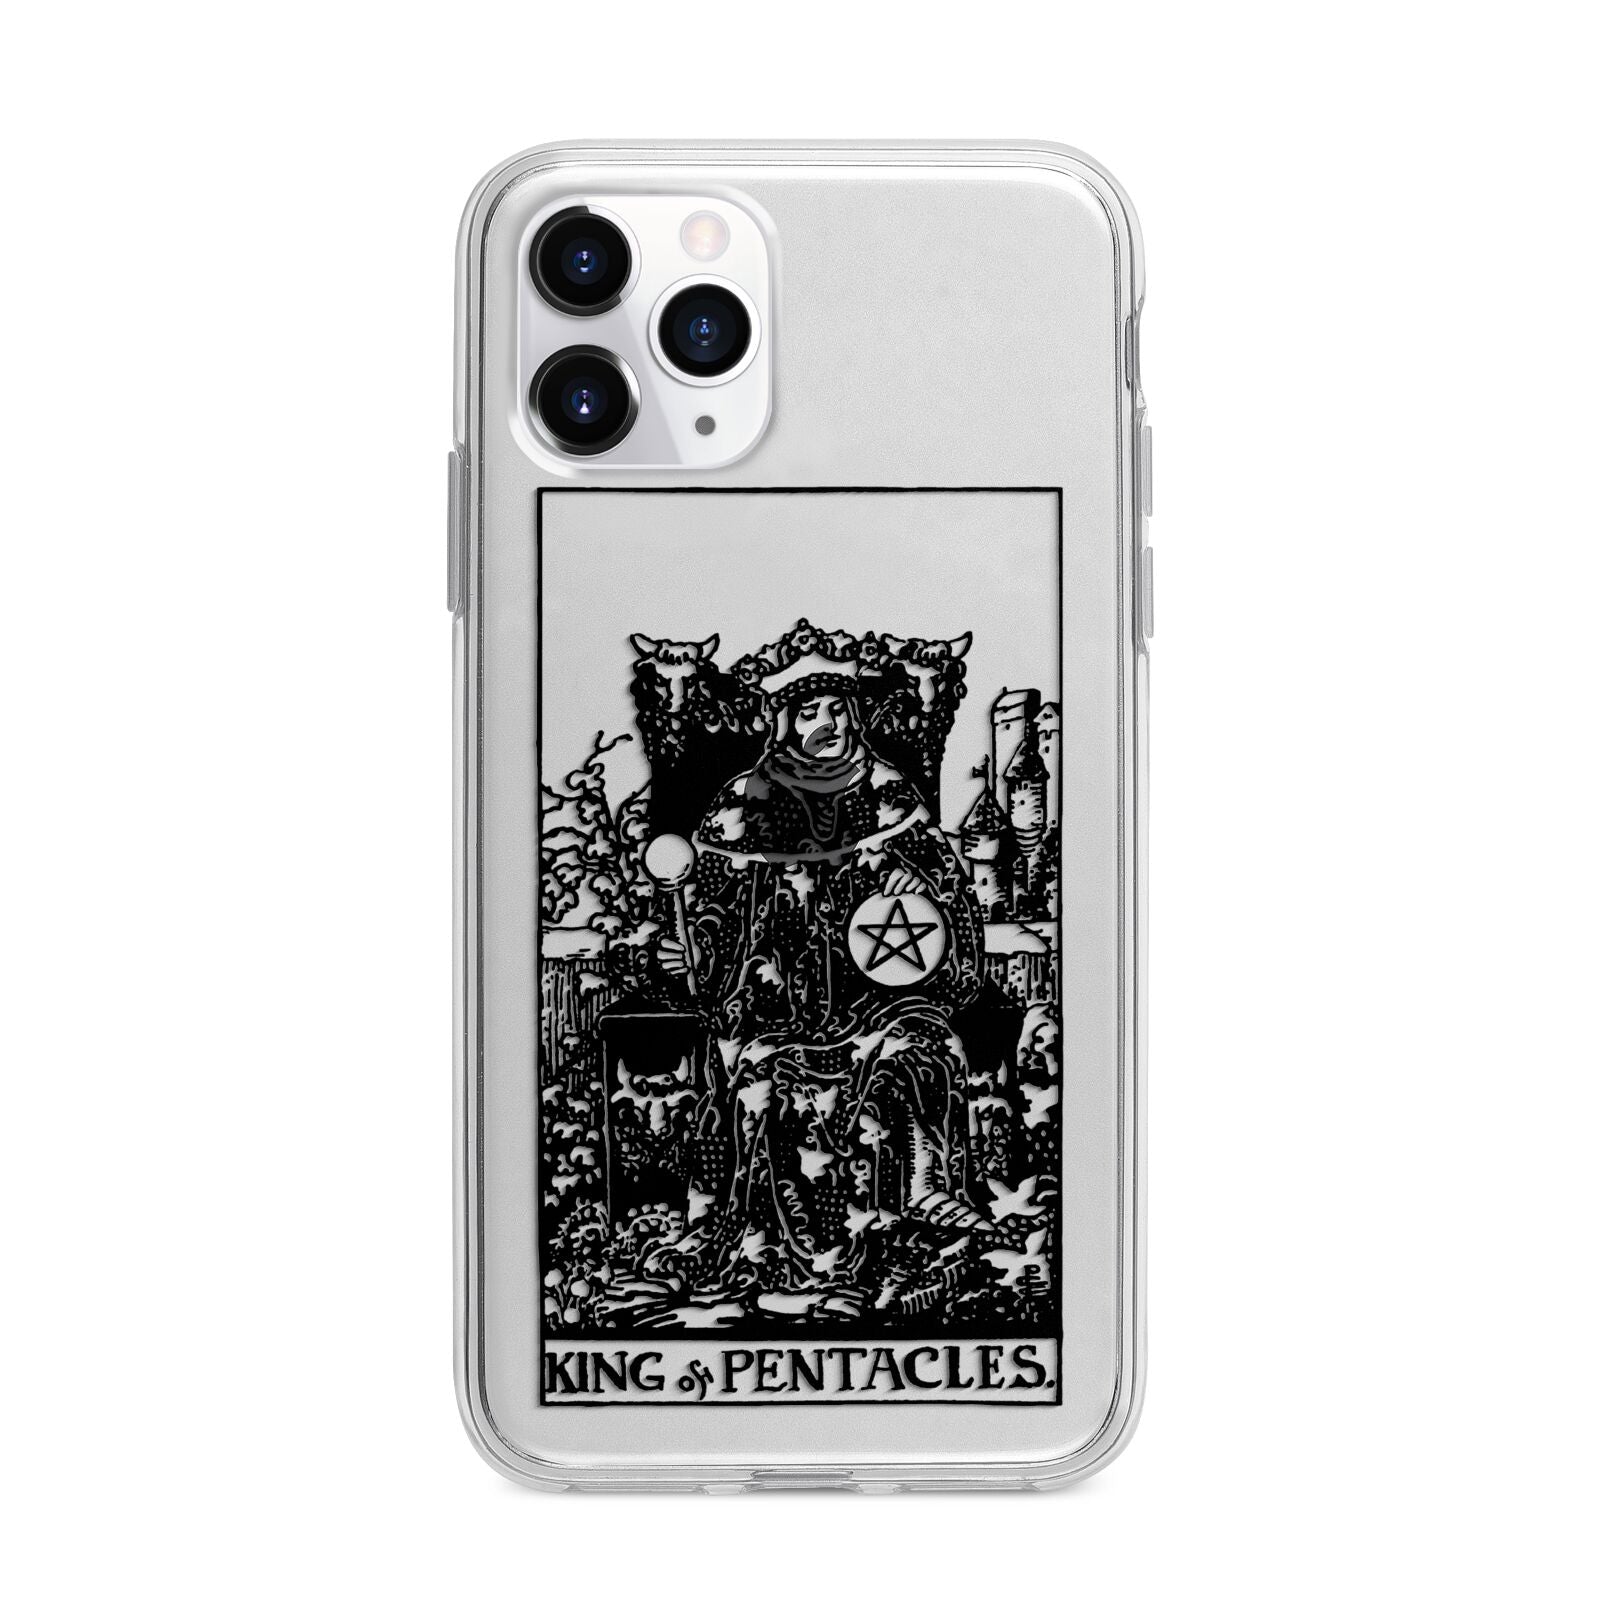 King of Pentacles Monochrome Apple iPhone 11 Pro Max in Silver with Bumper Case